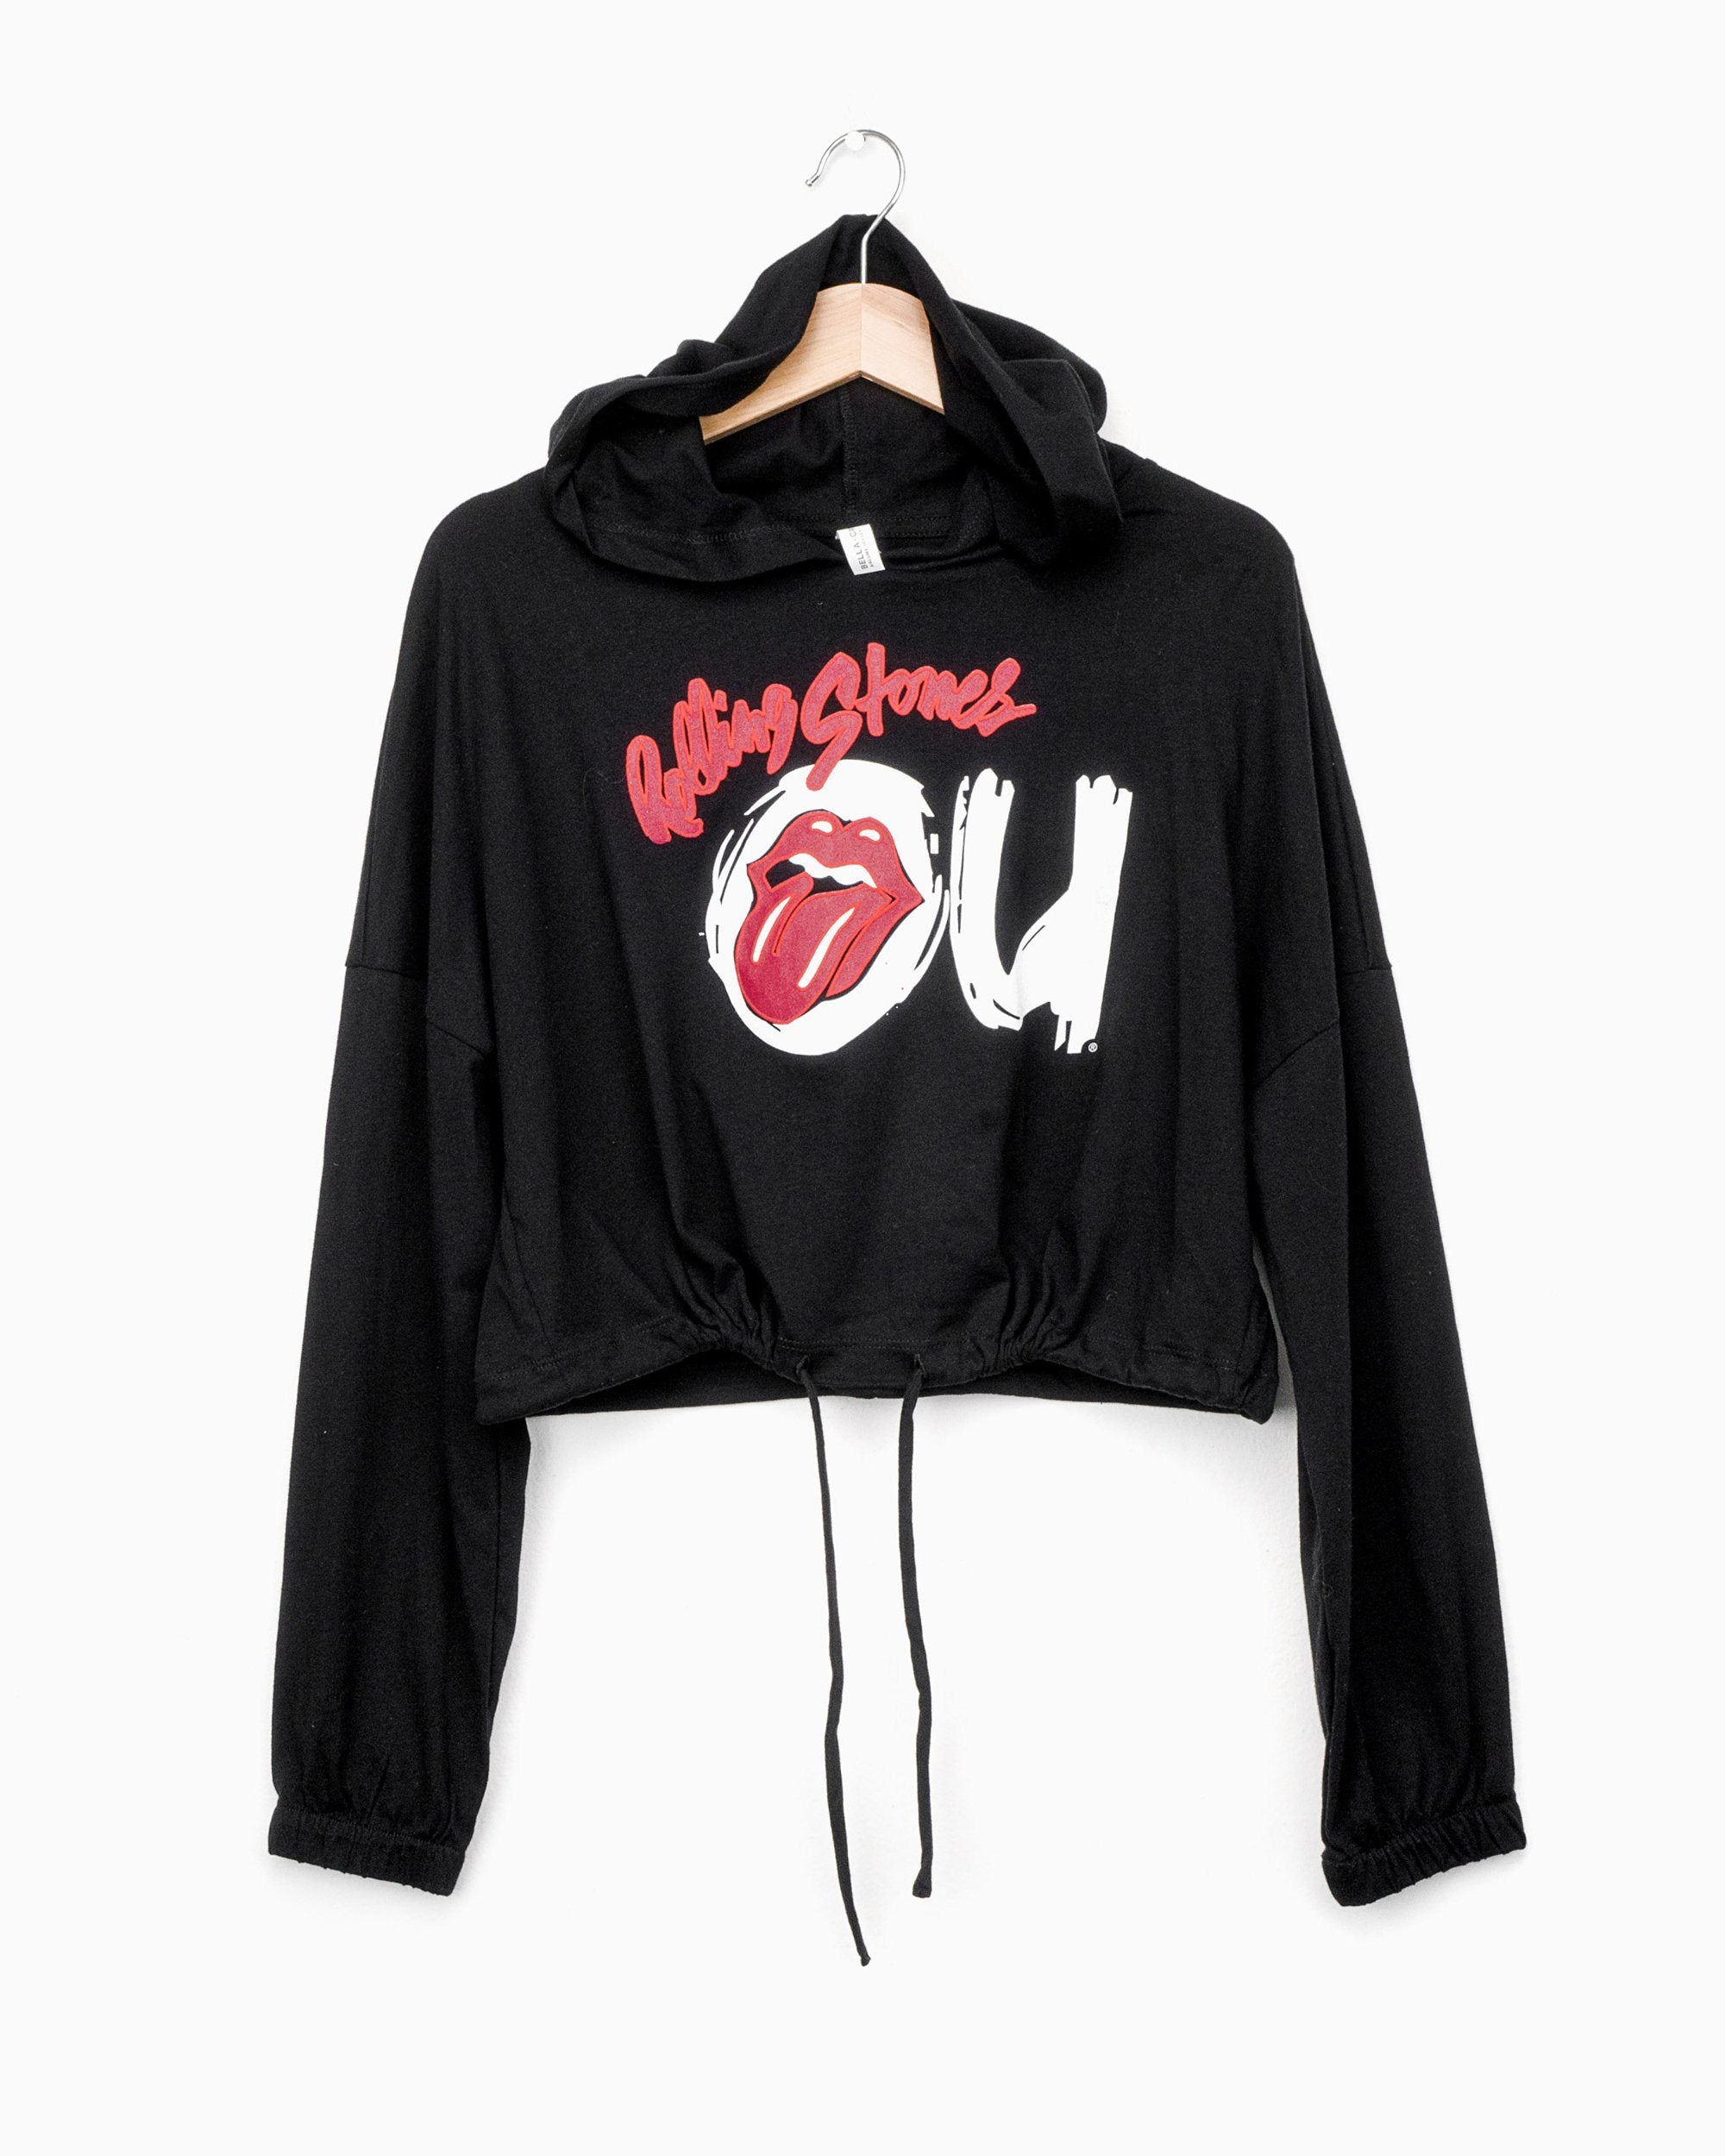 Rolling Stones OU Inside Lick Puff Ink Black Cinched Cropped Hoodie (4529541218407)